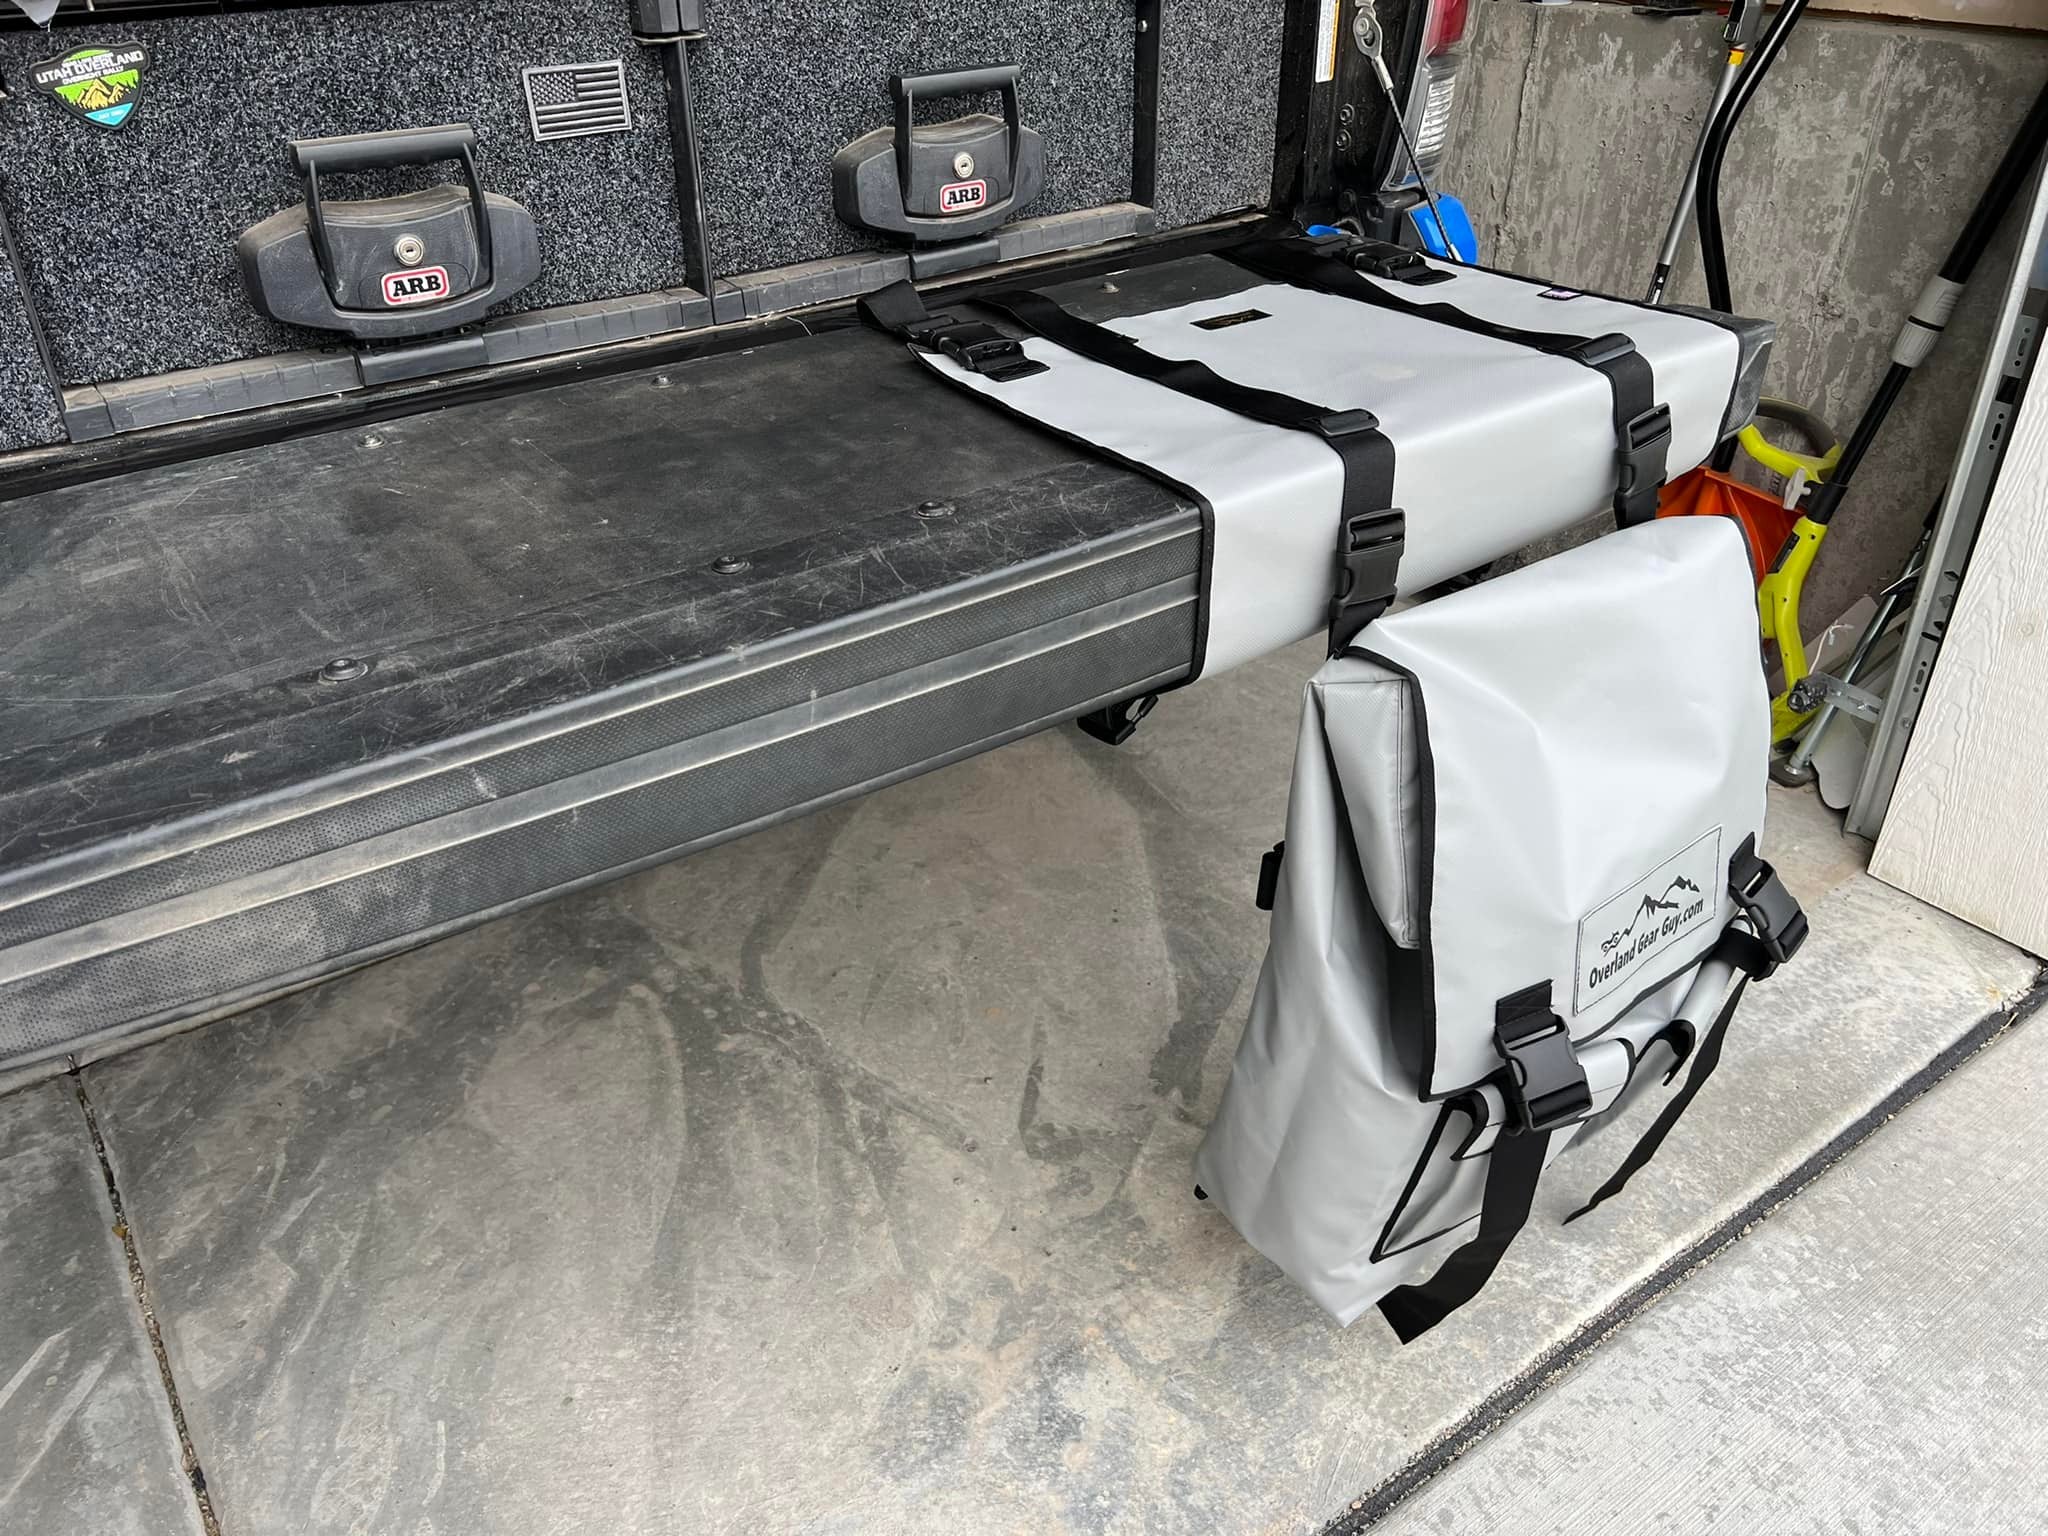 AUPERTO Weatherproof Truck Bed Cargo Bag - Heavy Duty Waterproof Luggage Bag  for Truck Bed with Net and 4 Metal Carbiners Fits Any Truck Size :  Amazon.in: Car & Motorbike